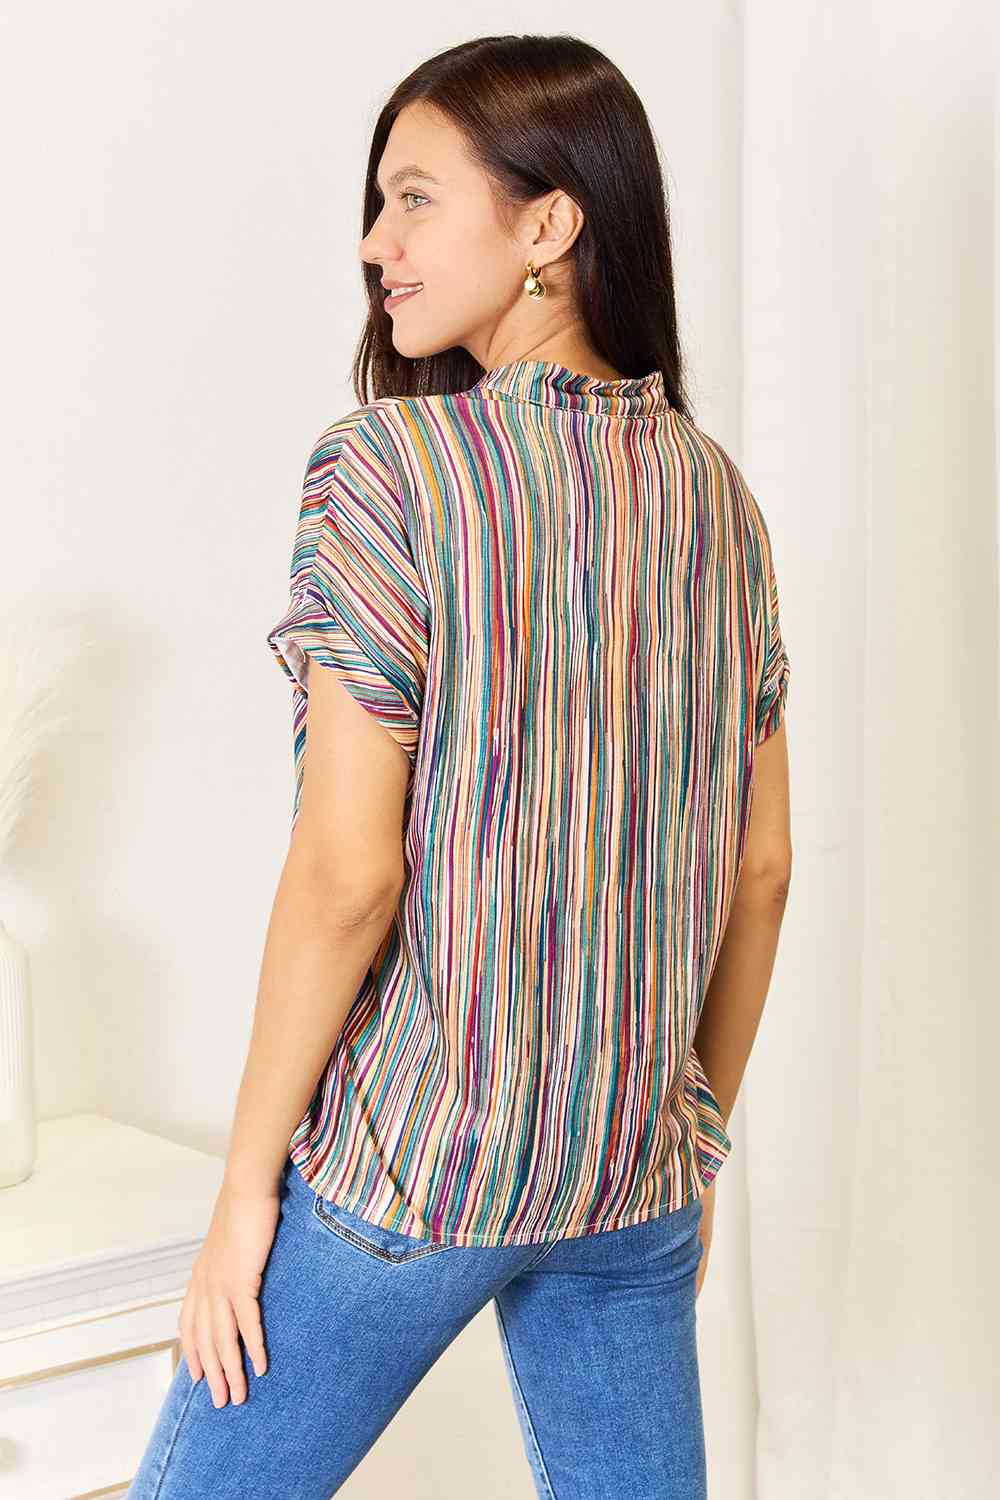 Double Take Multicolored Stripe Notched Neck Top BLUE ZONE PLANET